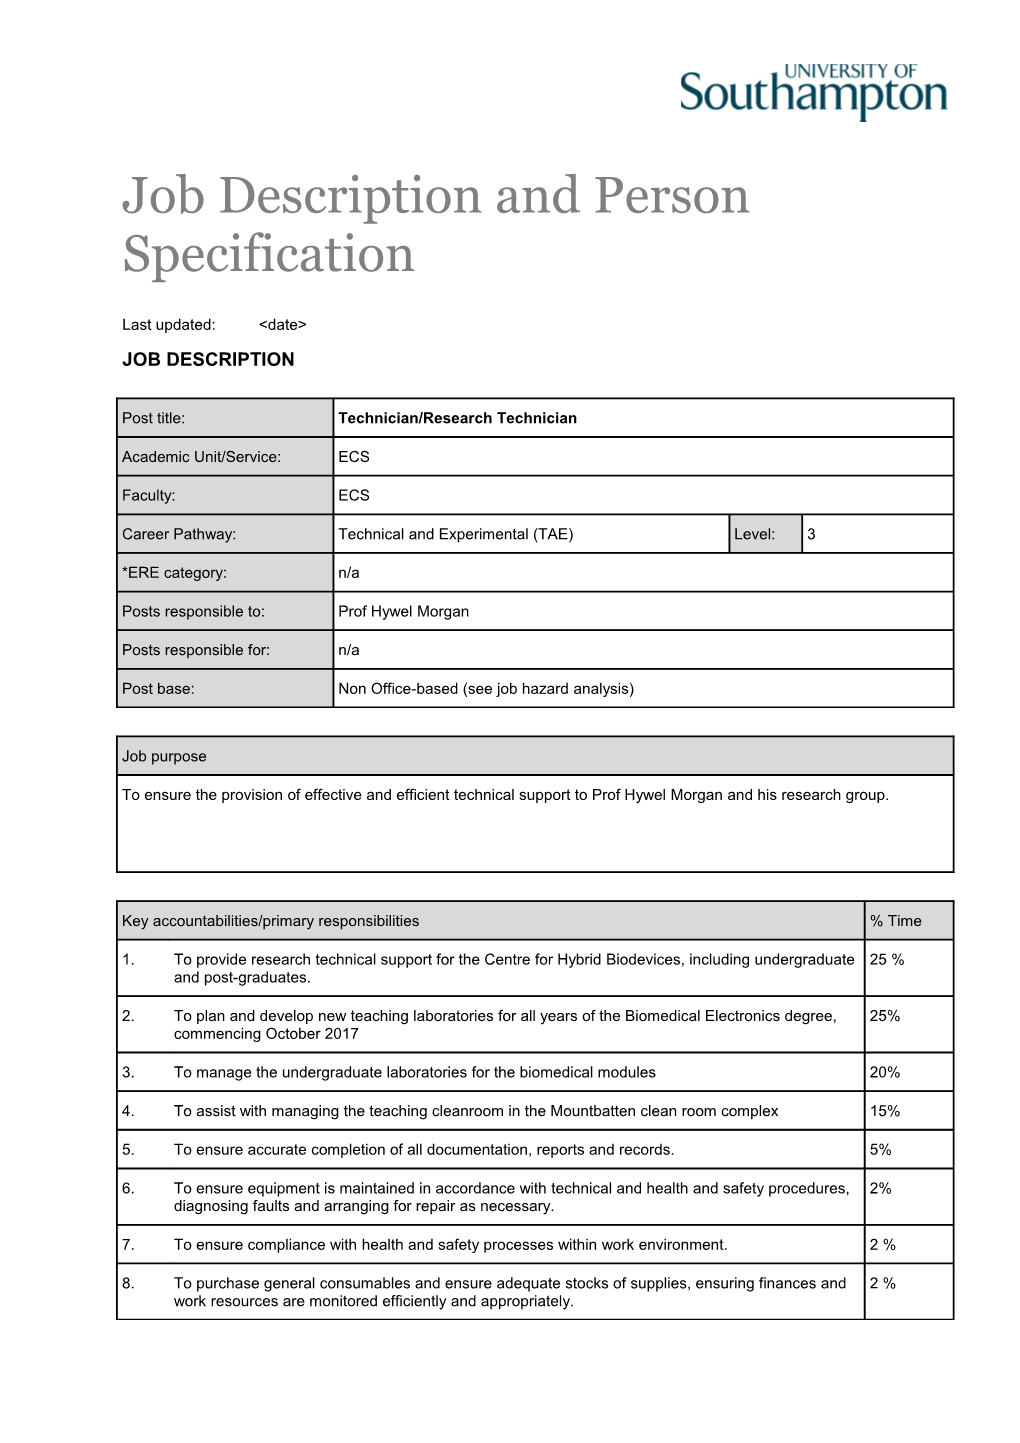 Person Specification s23